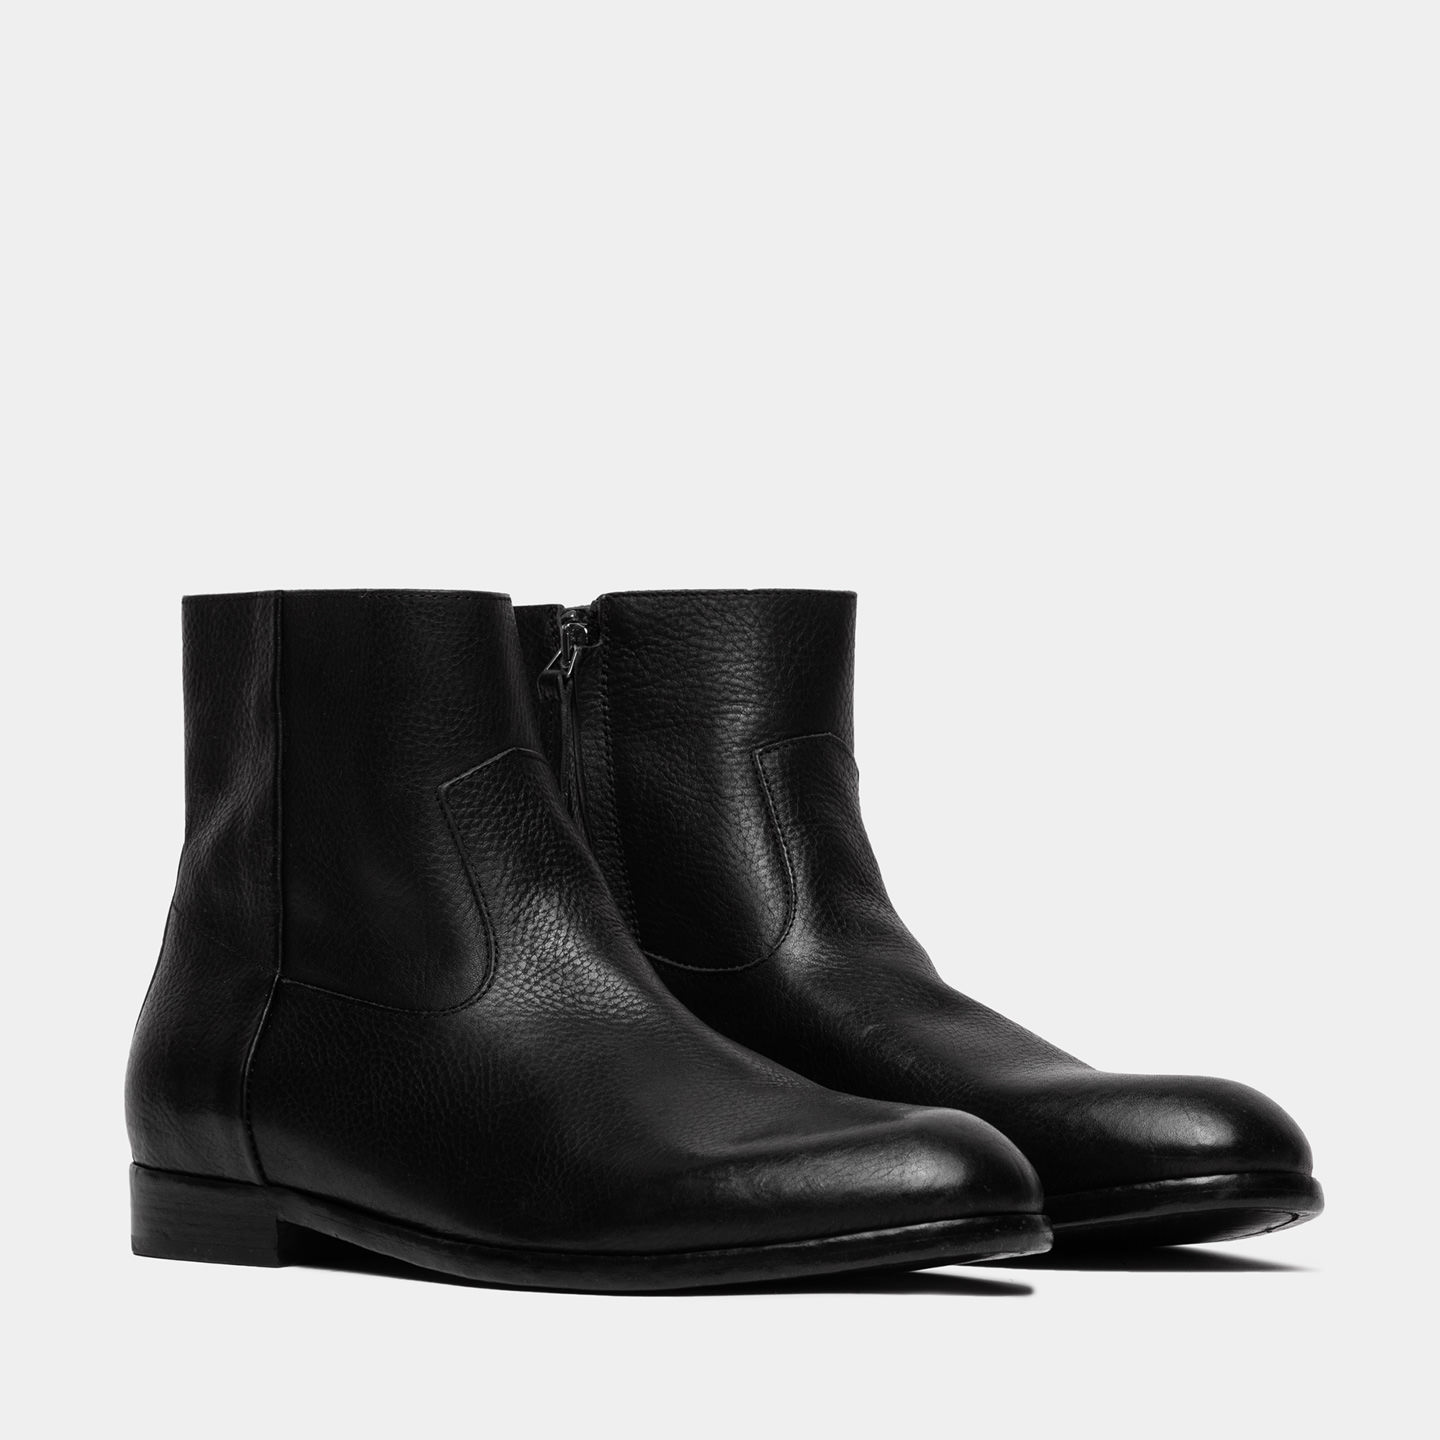 BUTTERO FLOYD ANKLE BOOTS IN BLACK HAMMERED LEATHER B10090MAIN-UC1/01-NERO